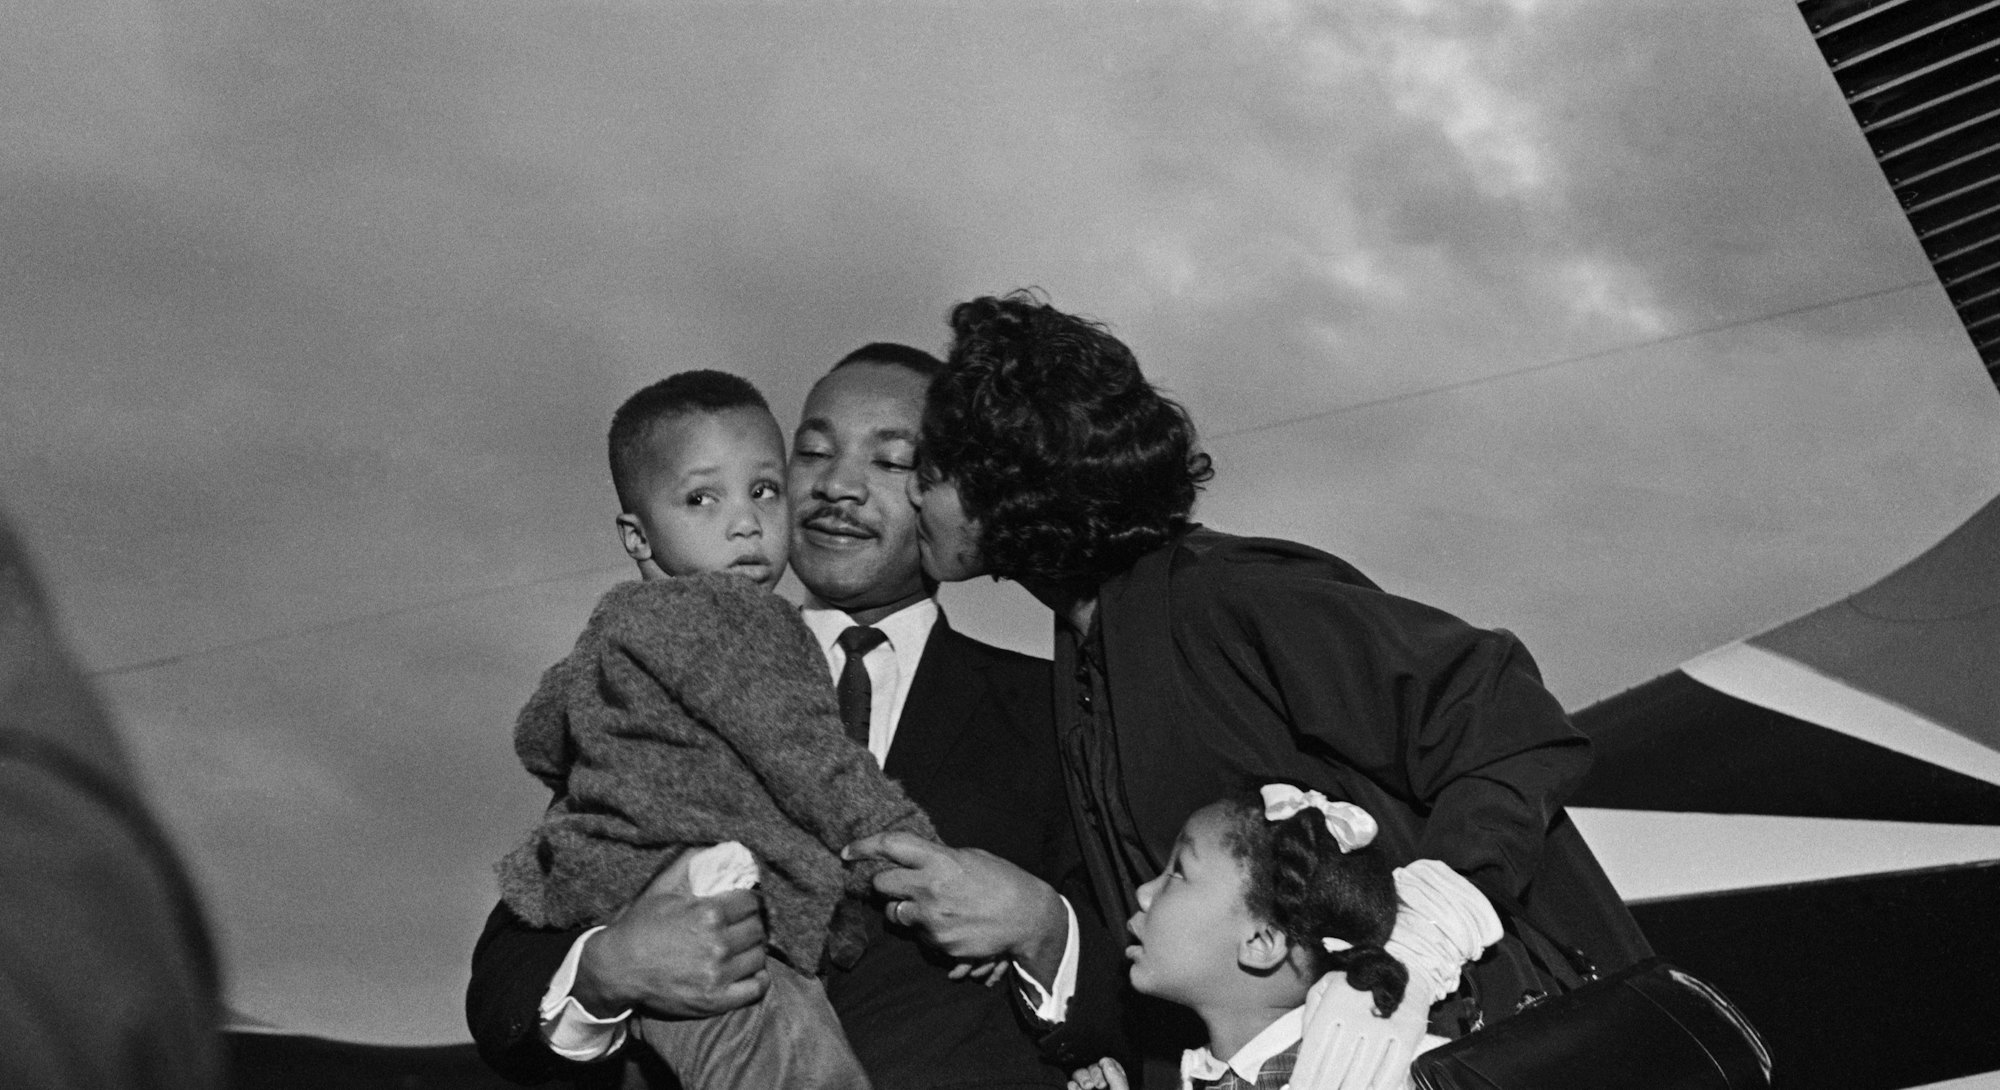 Martin Luther King Jr. was a proud dad, as evidenced by his quotes and photos with his children.